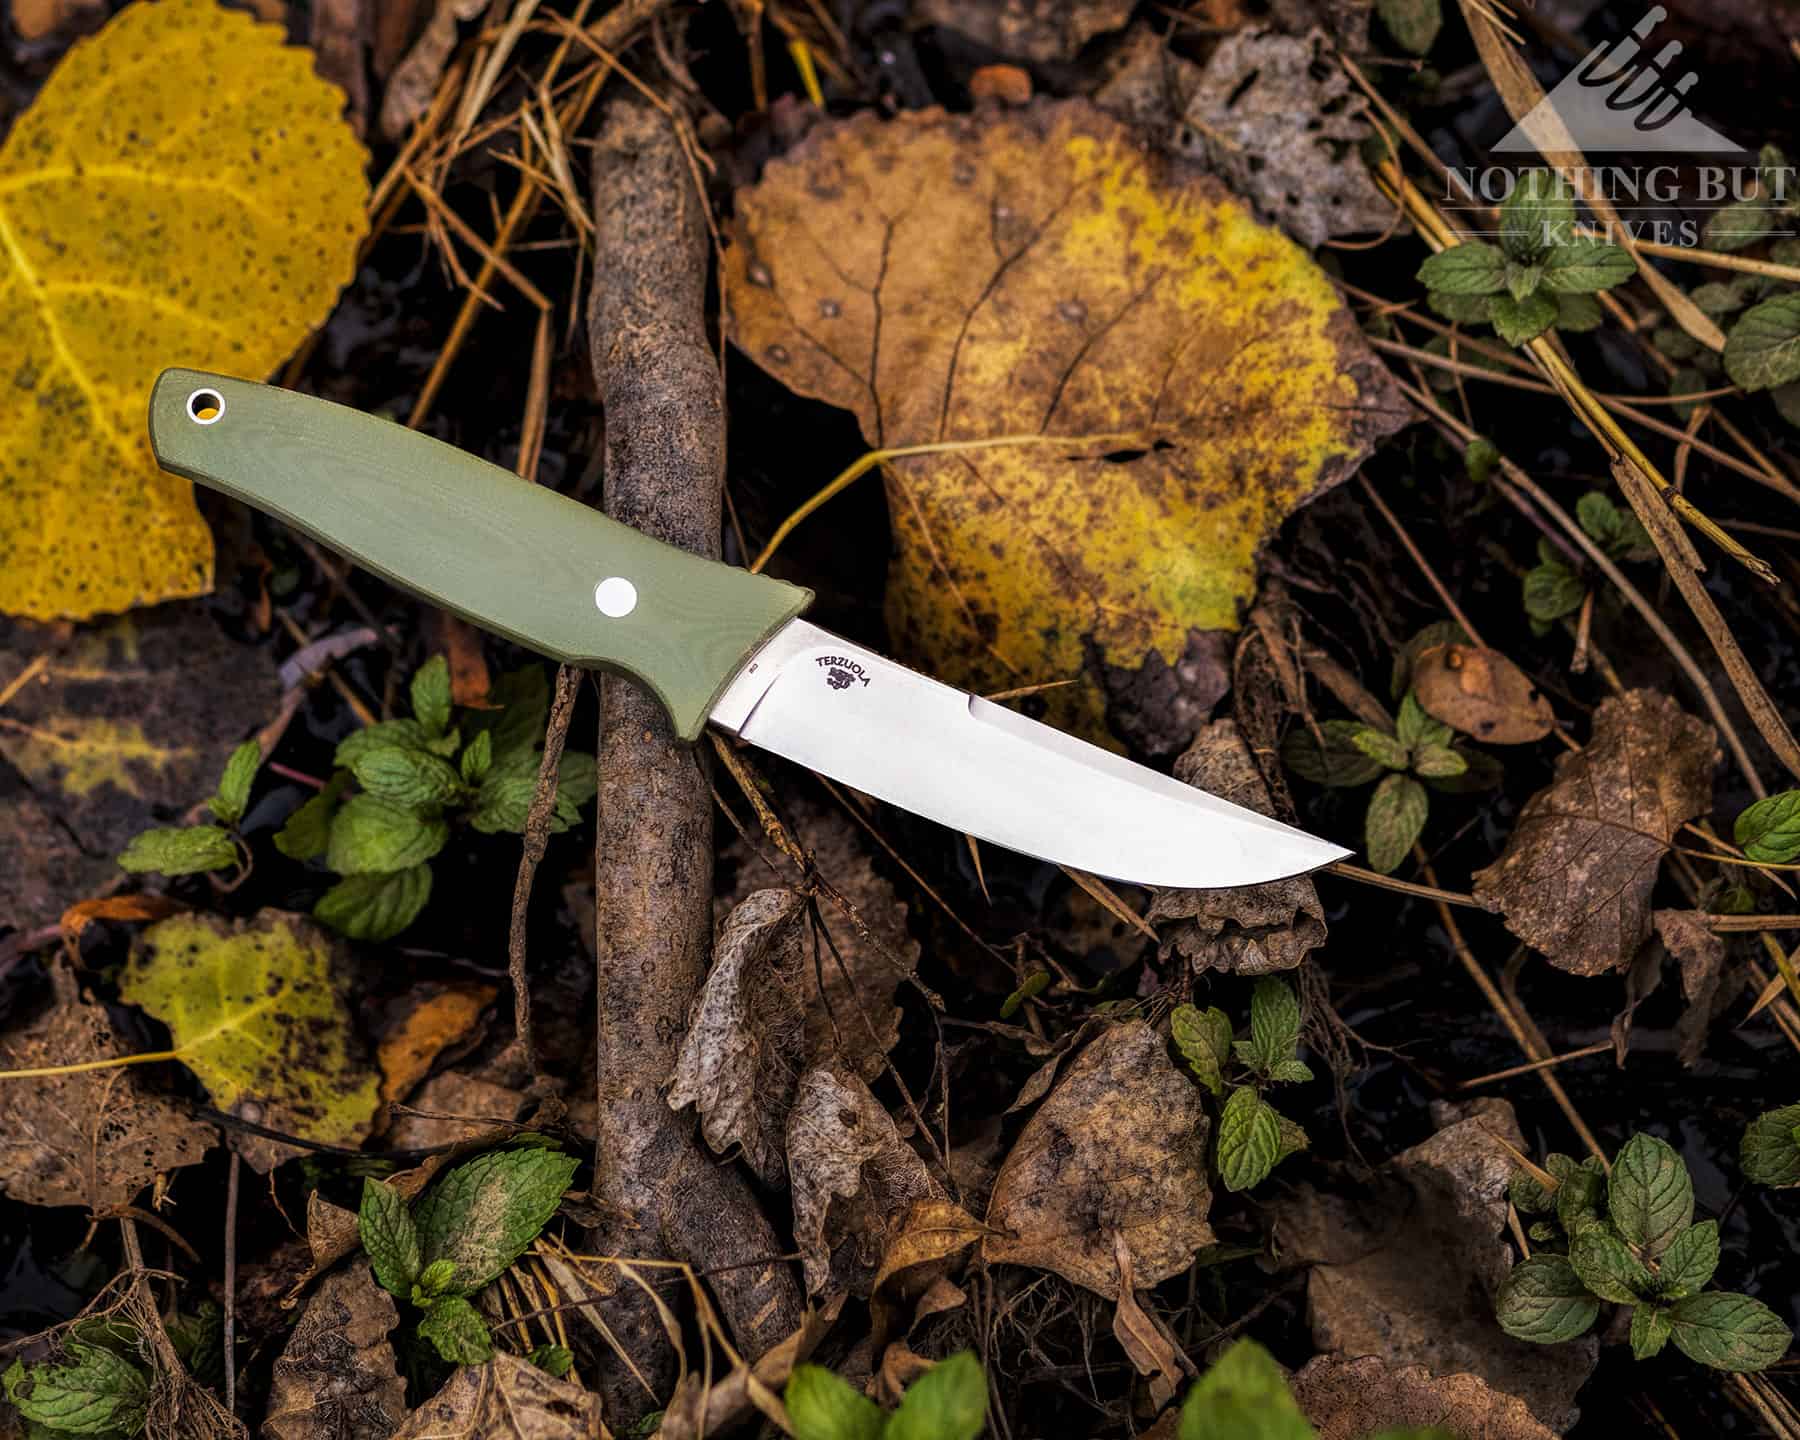 The Civivi Tamashii is a decent fixed blade for outdoor tasks. 